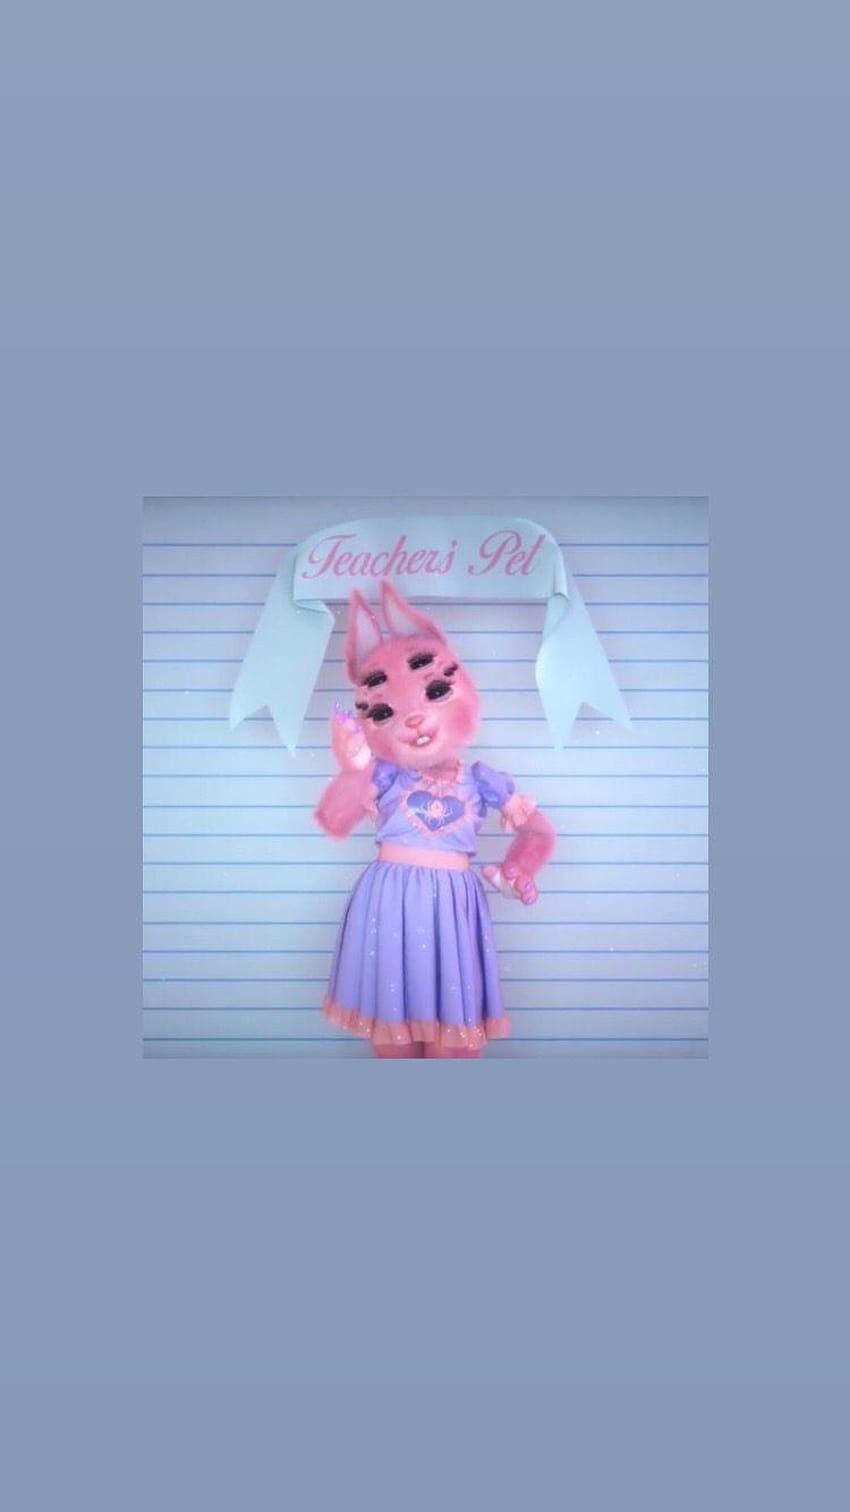 A pink stuffed animal with an image of the character on it - Melanie Martinez